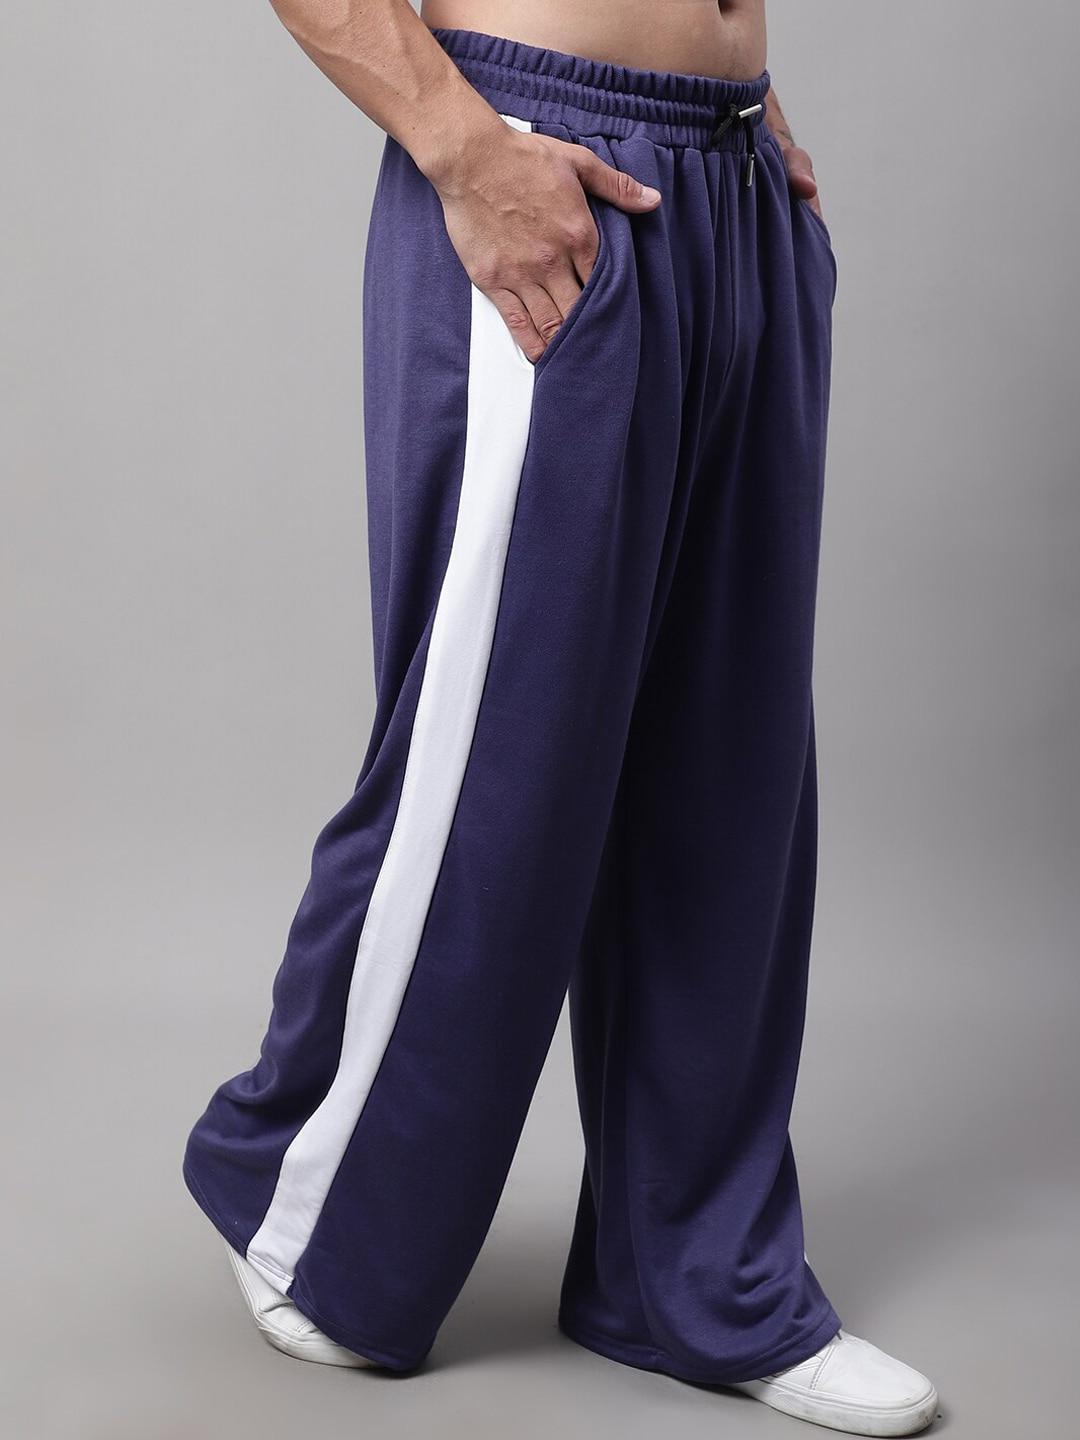 door74 men colourblocked relaxed fit cotton track pants